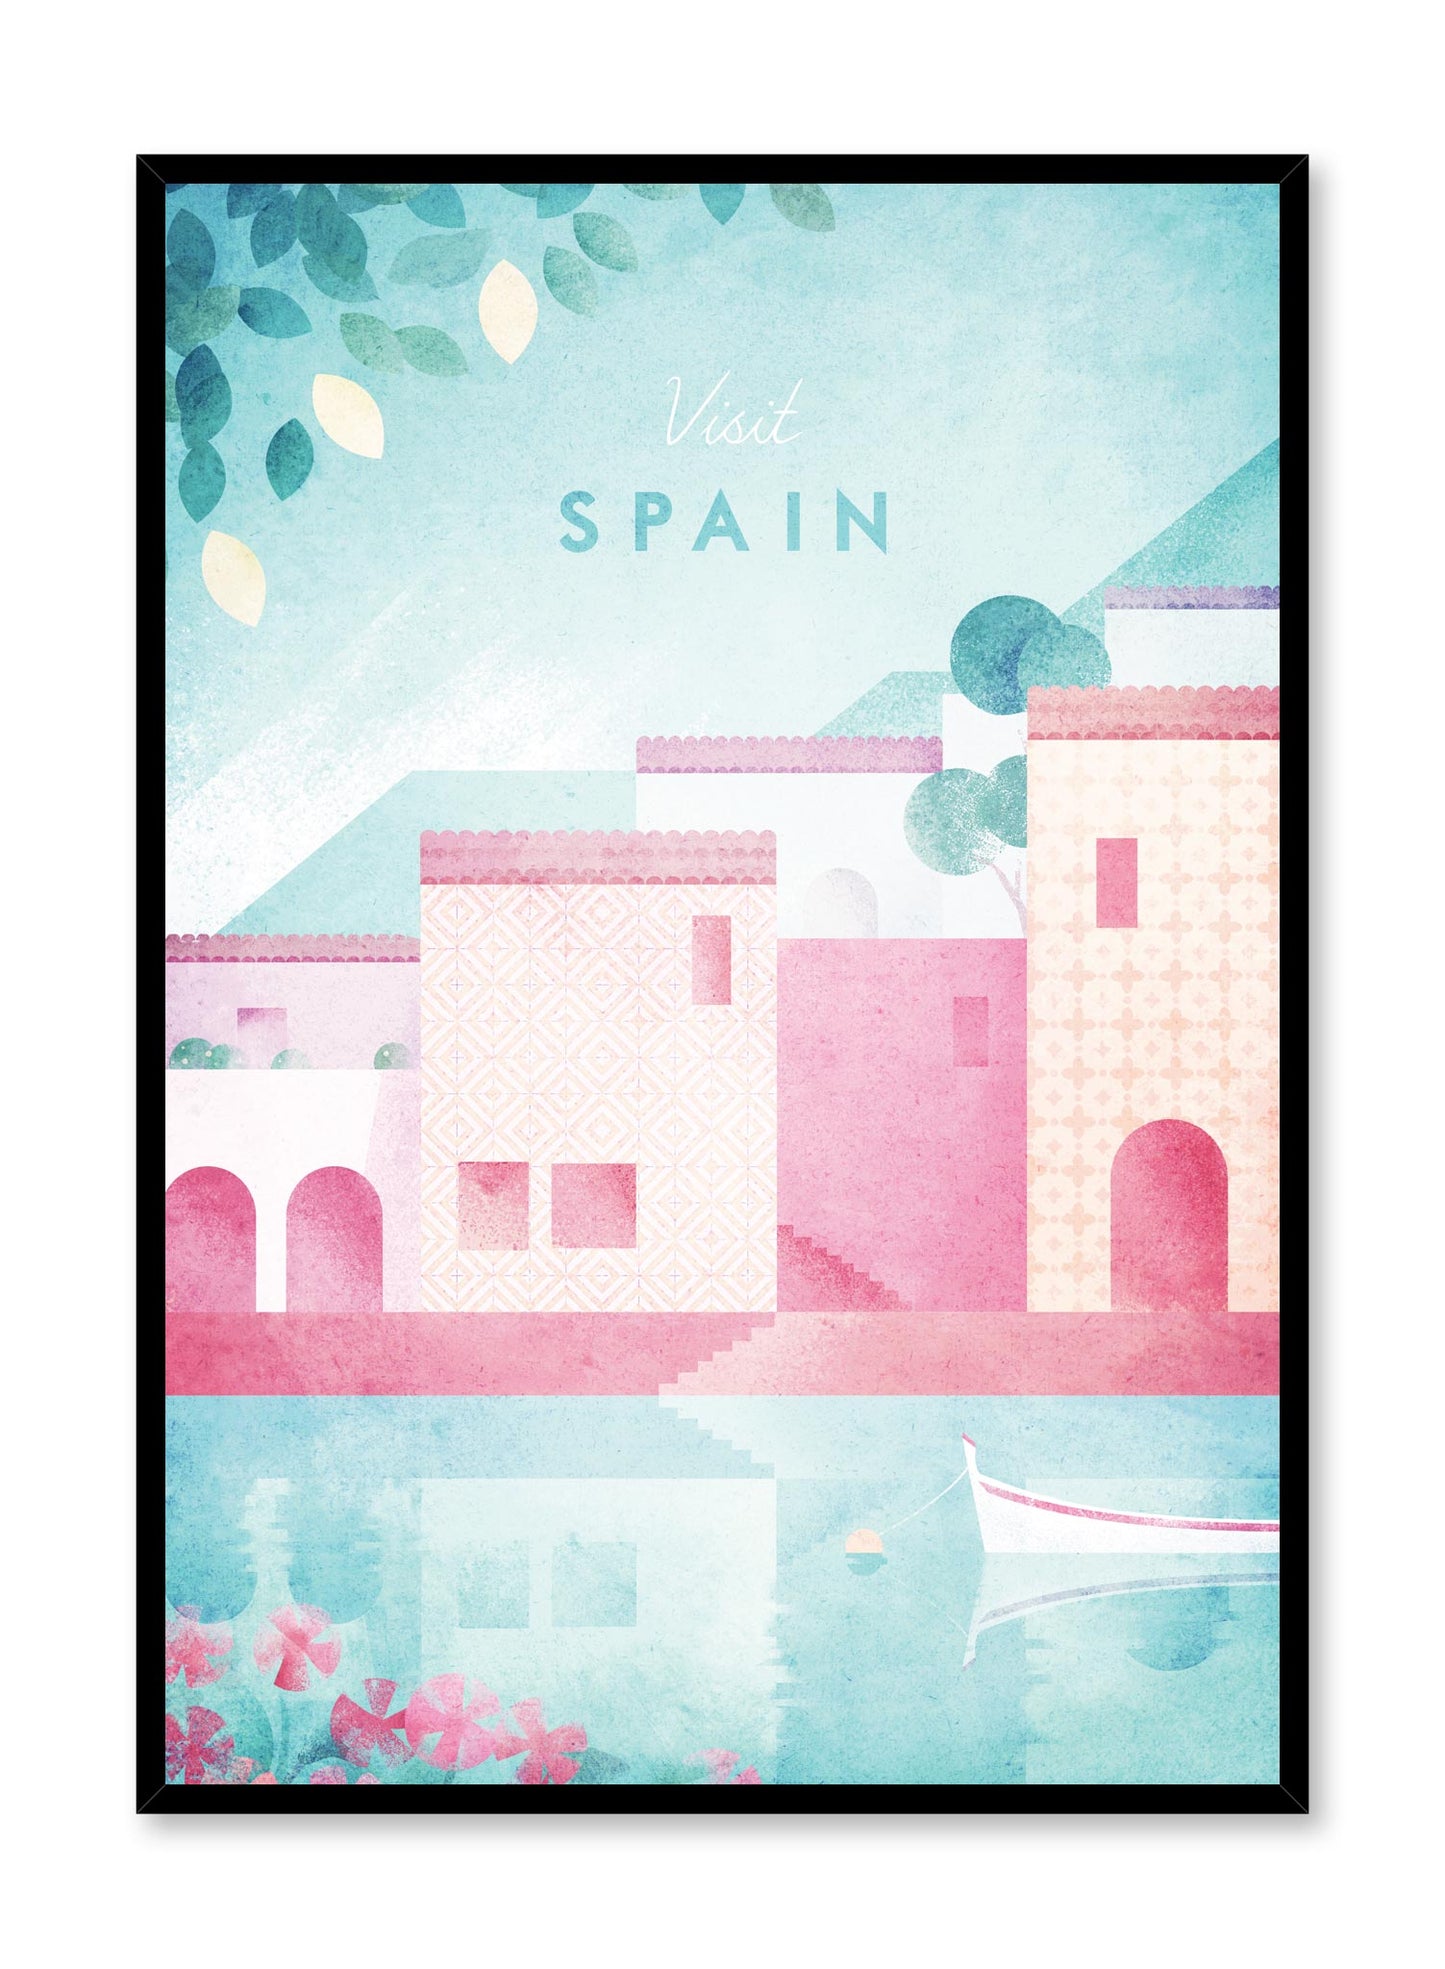 Modern minimalist travel poster by Opposite Wall with illustration of Spain